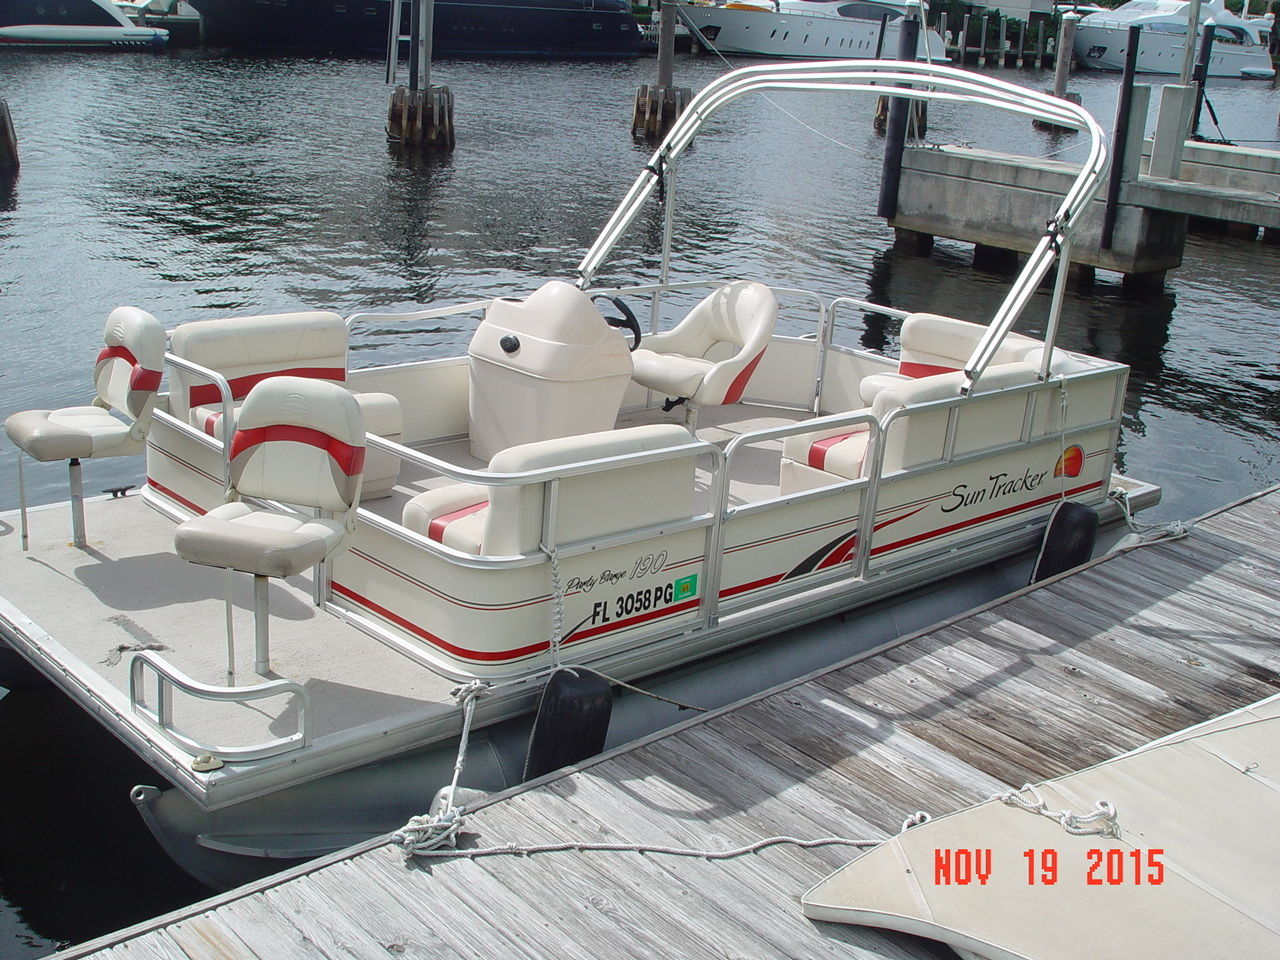 Sun Tracker 190 boat for sale from USA